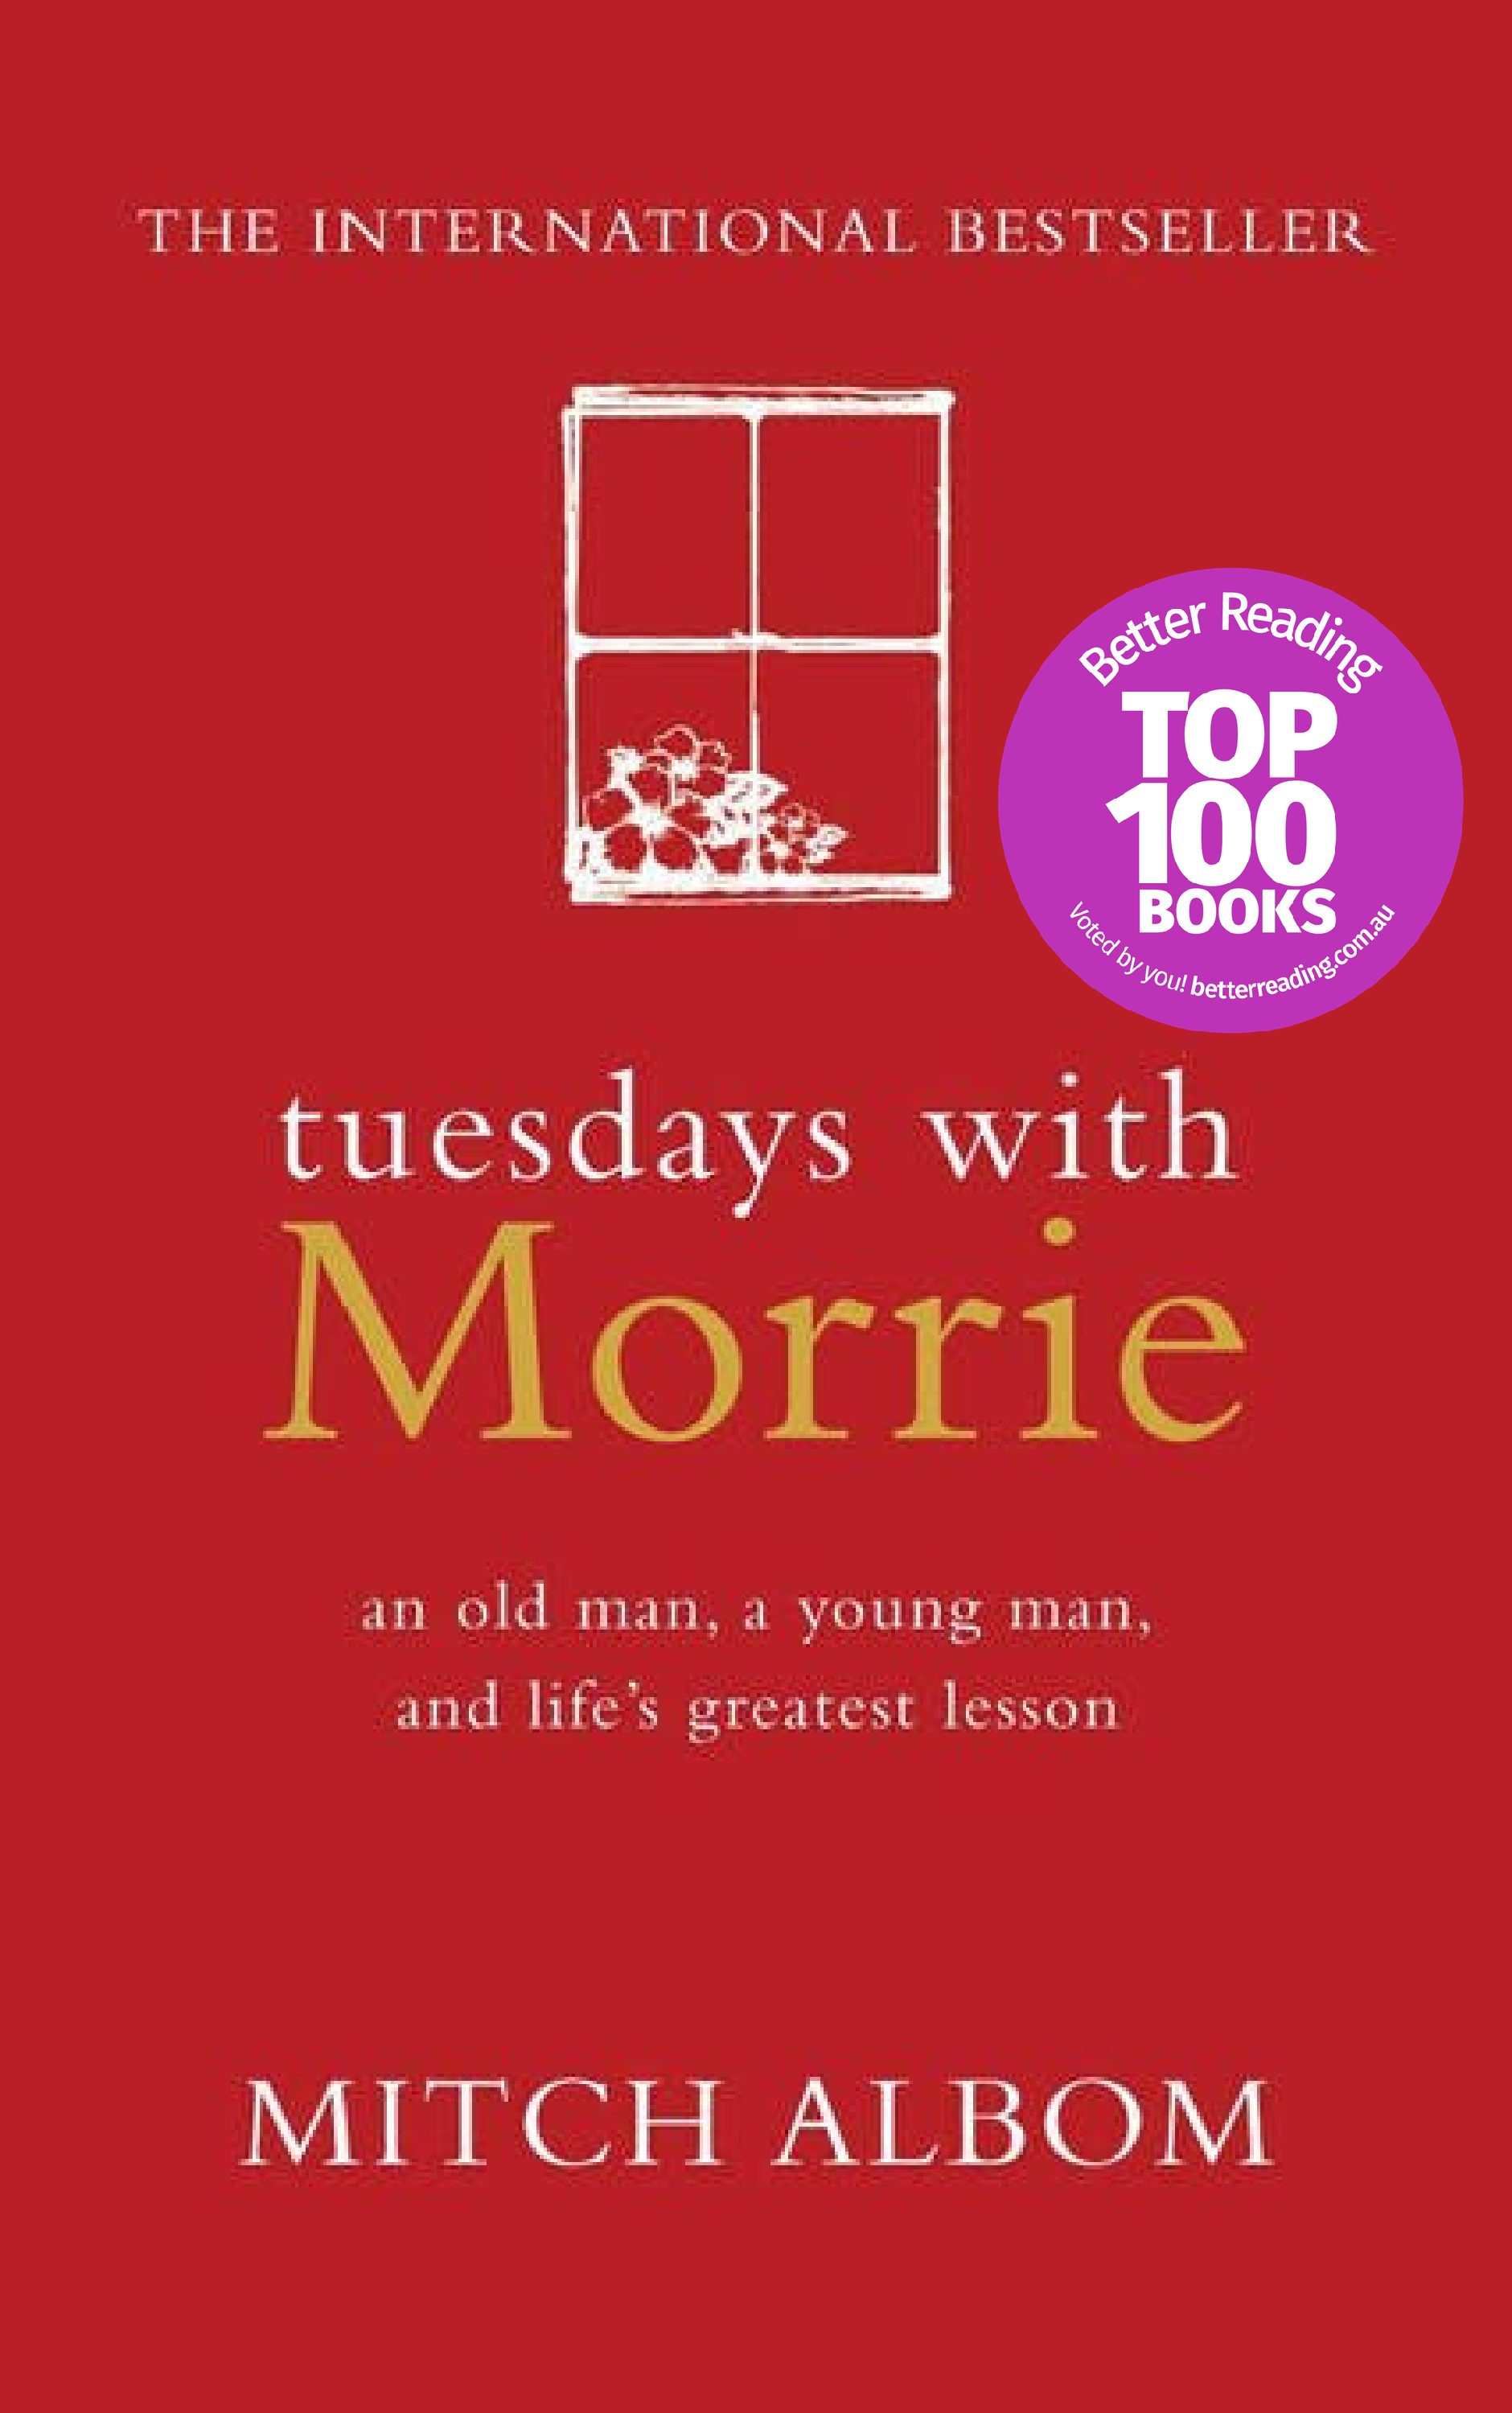 Quick Book Review: Tuesdays with Morrie